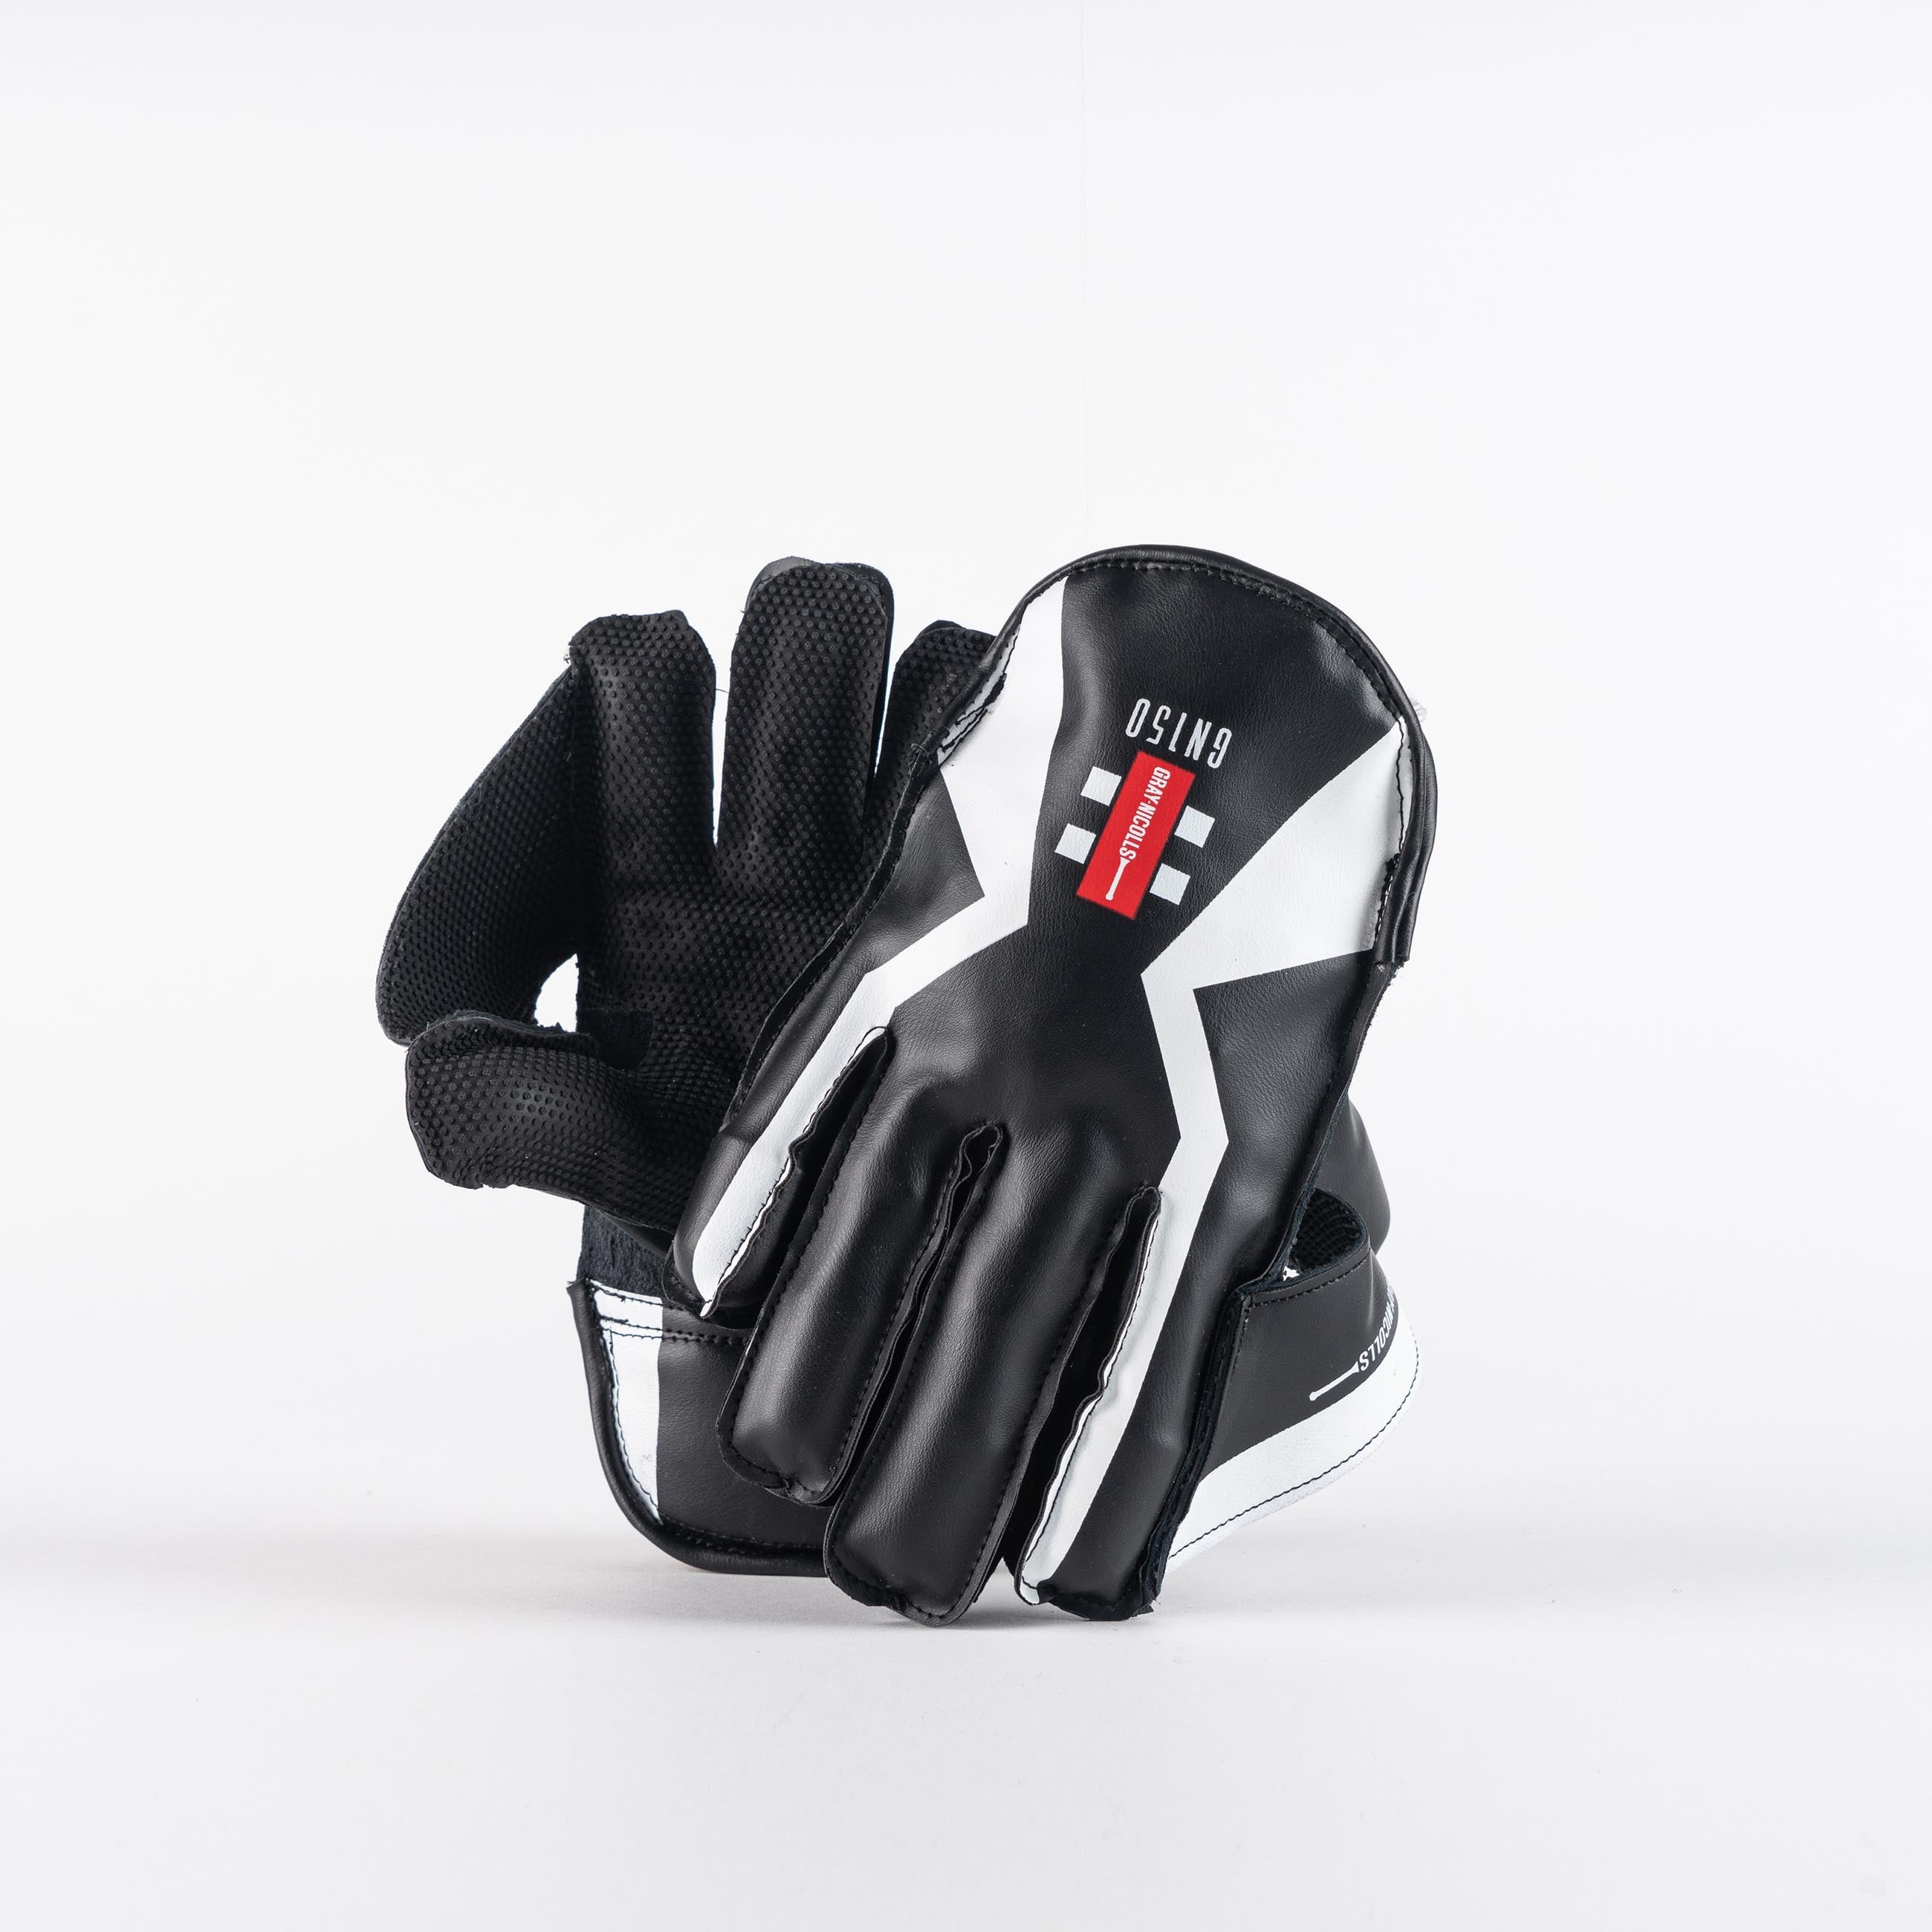 CWAI24Wicketkeeping GN150 WK Glove Pair